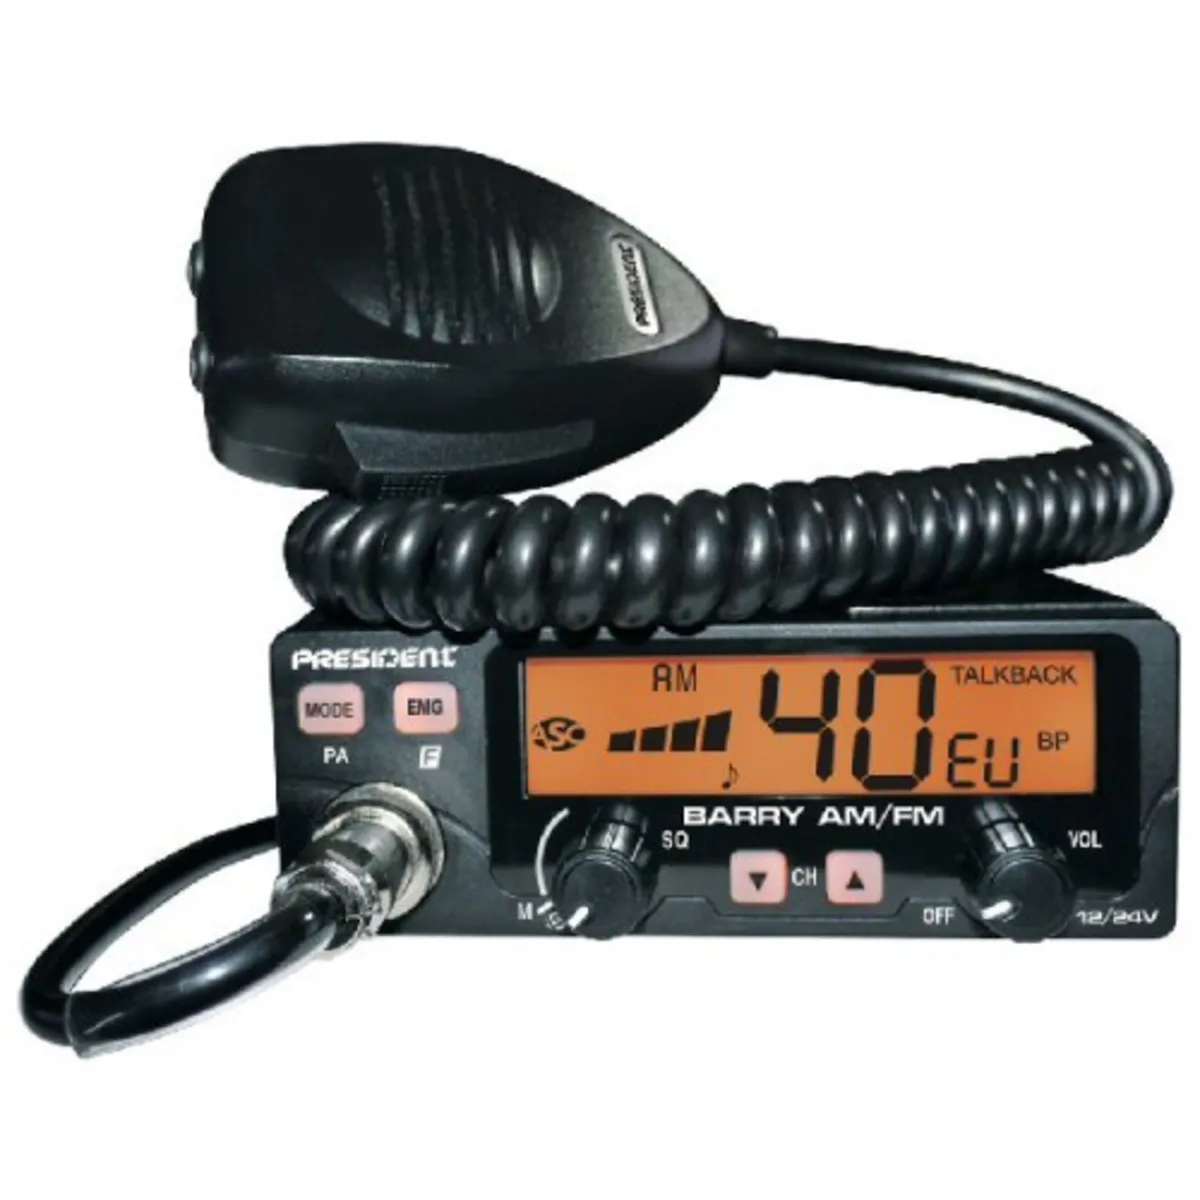 CB RADIO, SCANNERS,  AERIALS AND ACCESSORIES - Image 1